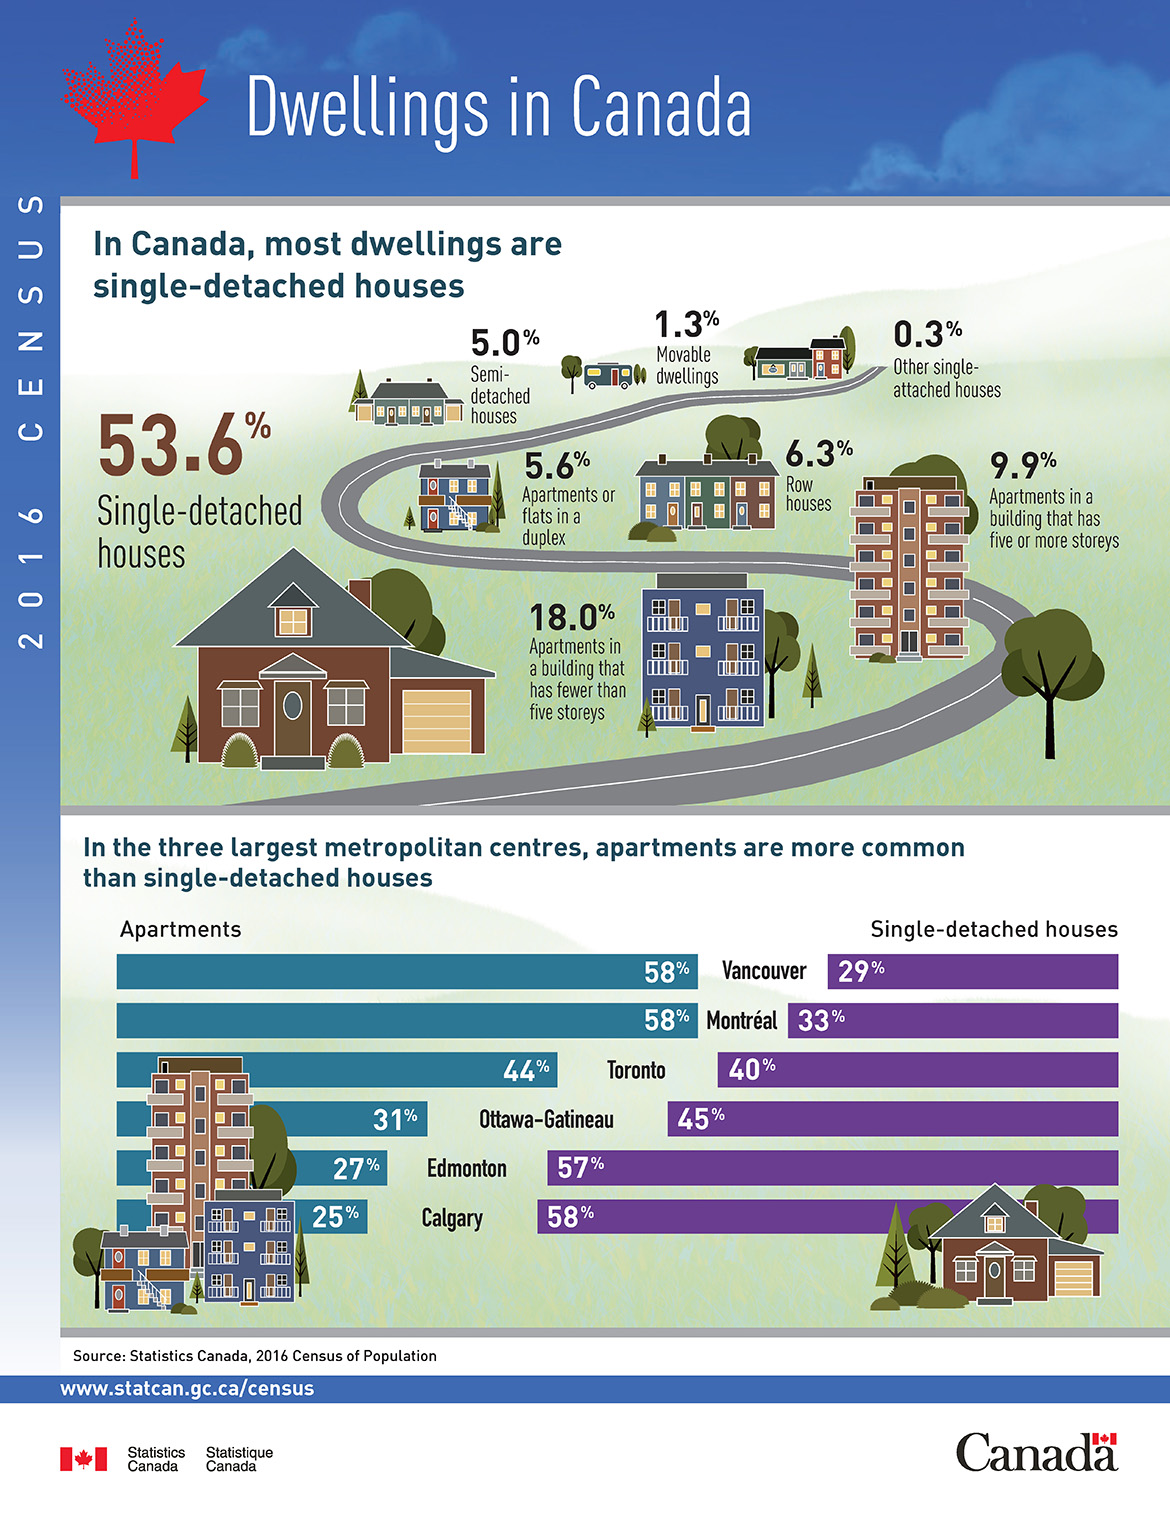 Infographic: Dwellings in Canada, 2016 Census of Population